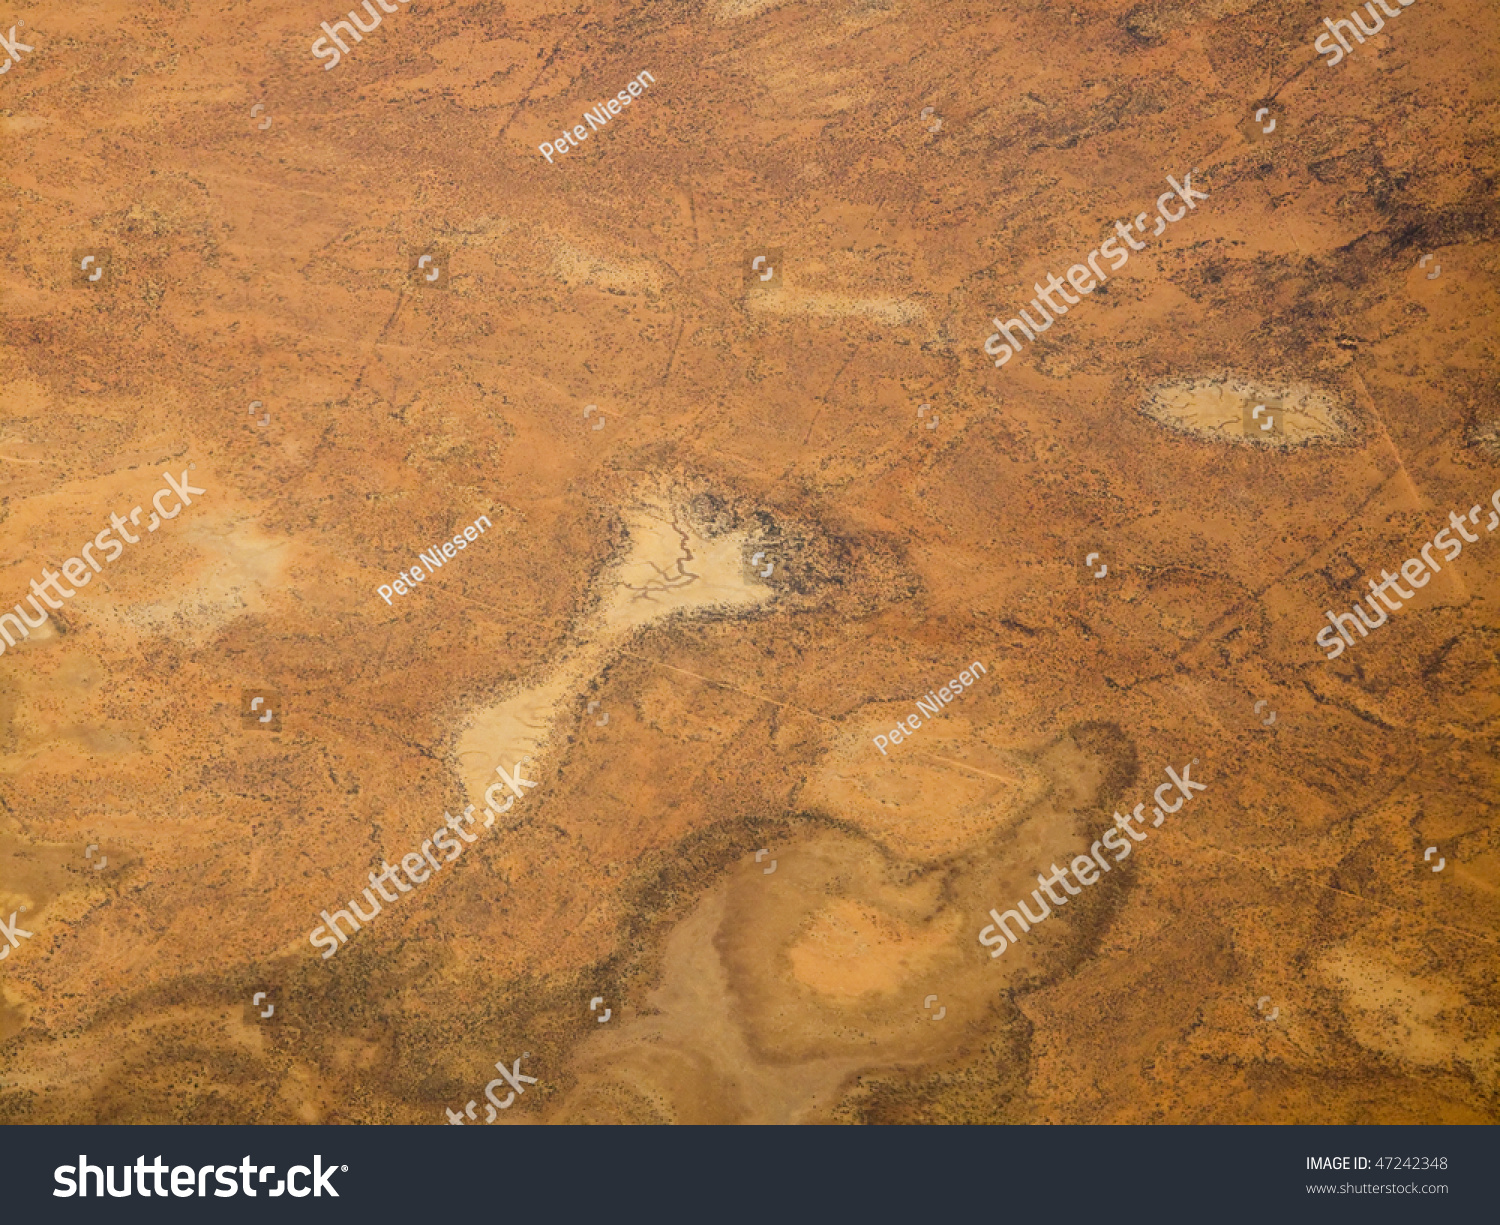 Aerial View of the Textures and Patterns of the Desert Sands in the Northern Territories of Australia #47242348